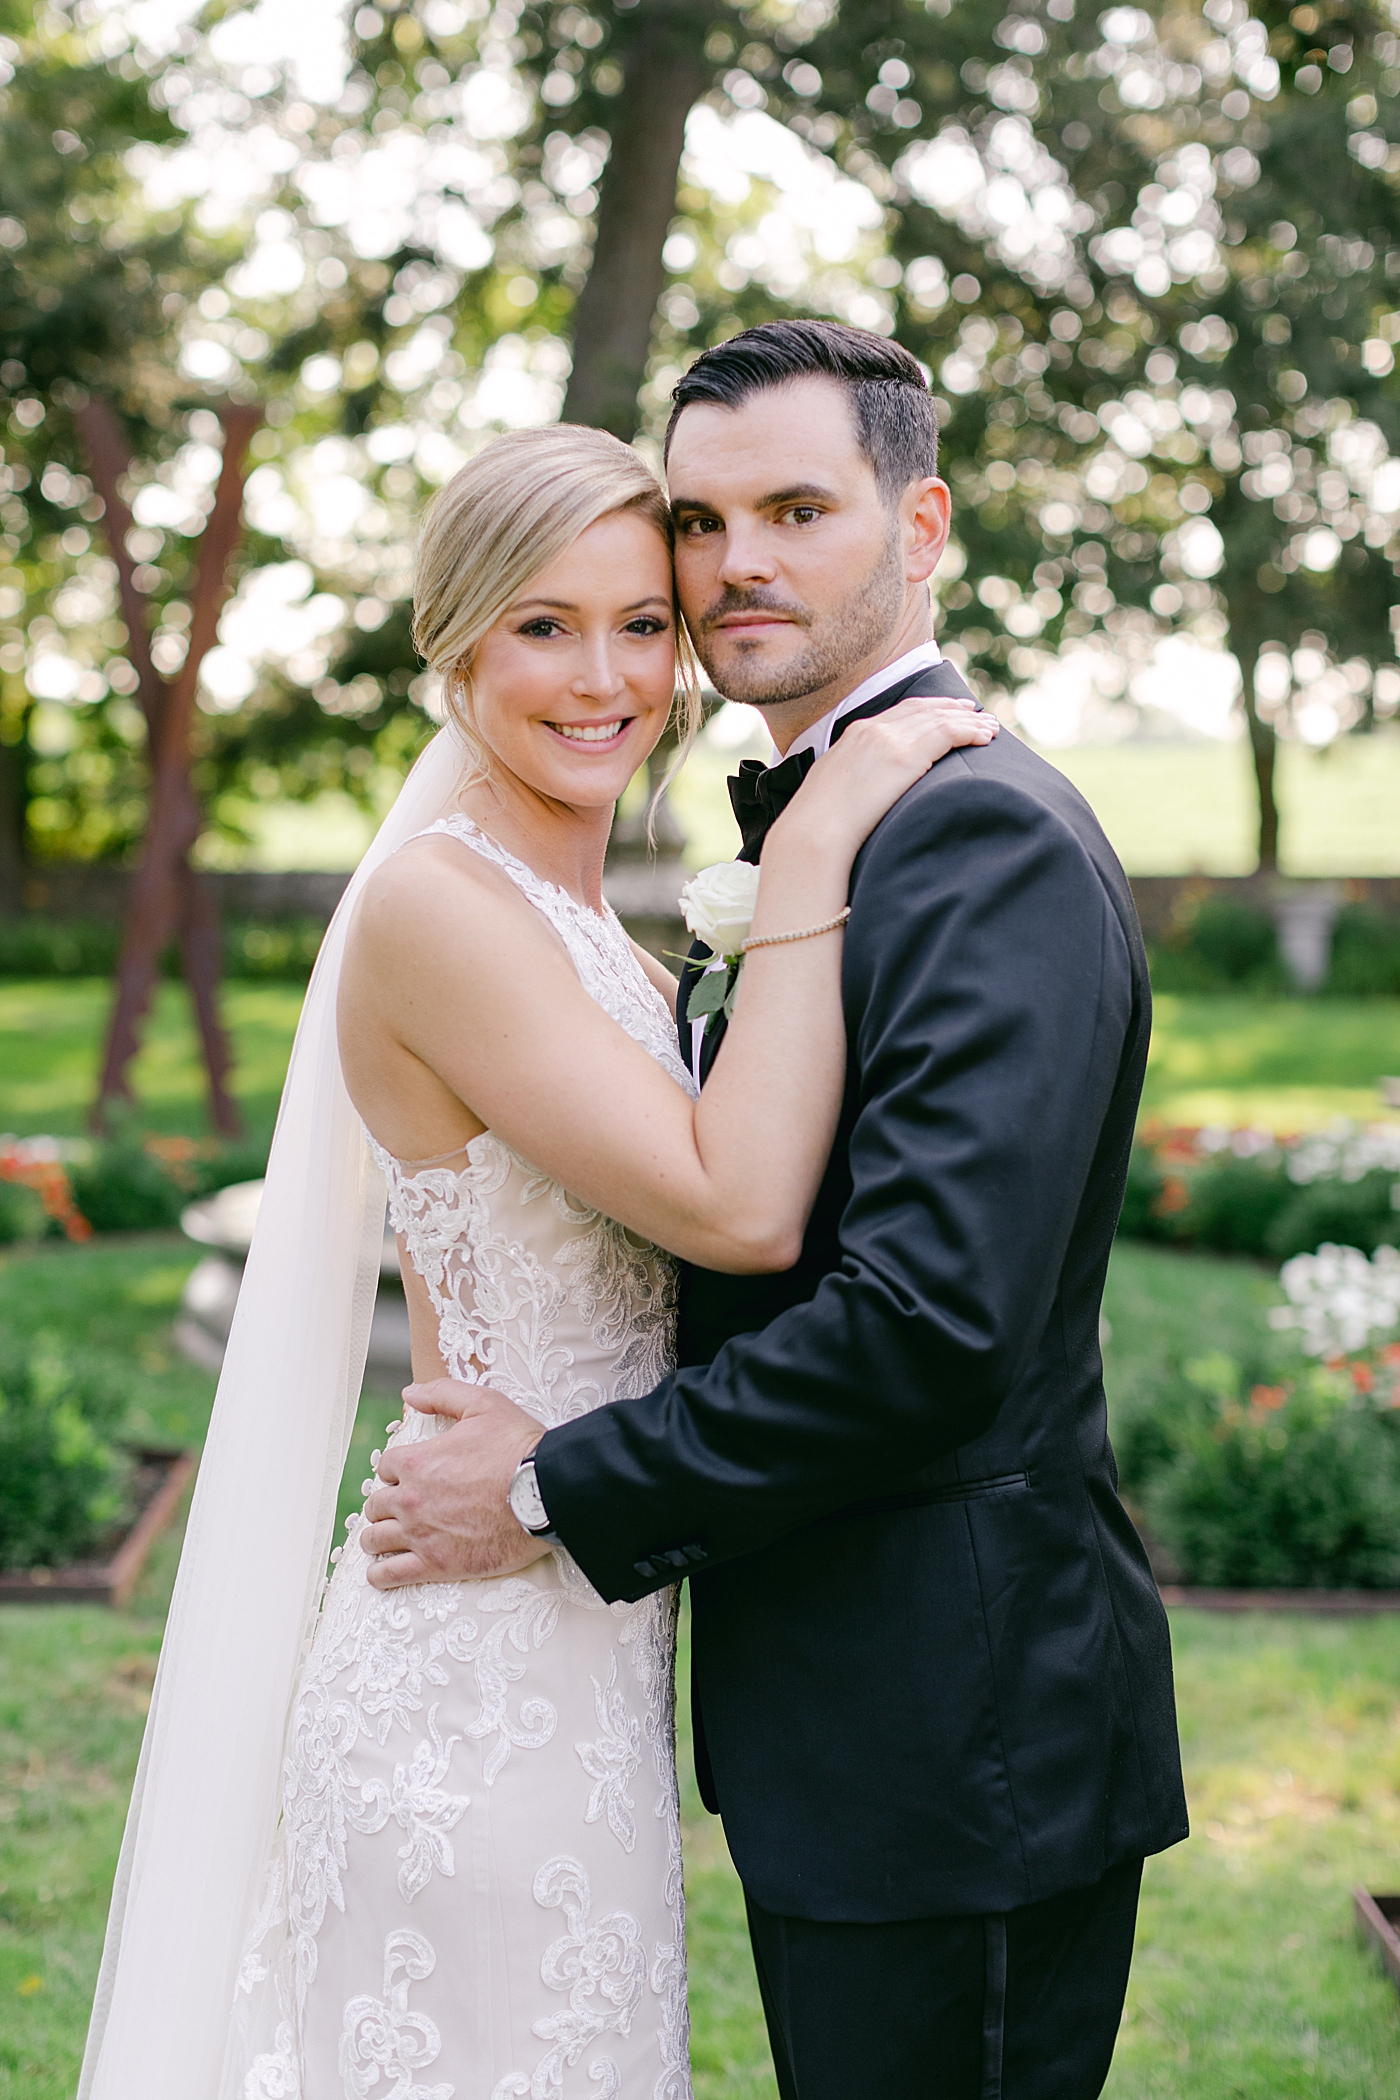 Bride and groom portraits | Image by Hope Helmuth Photography